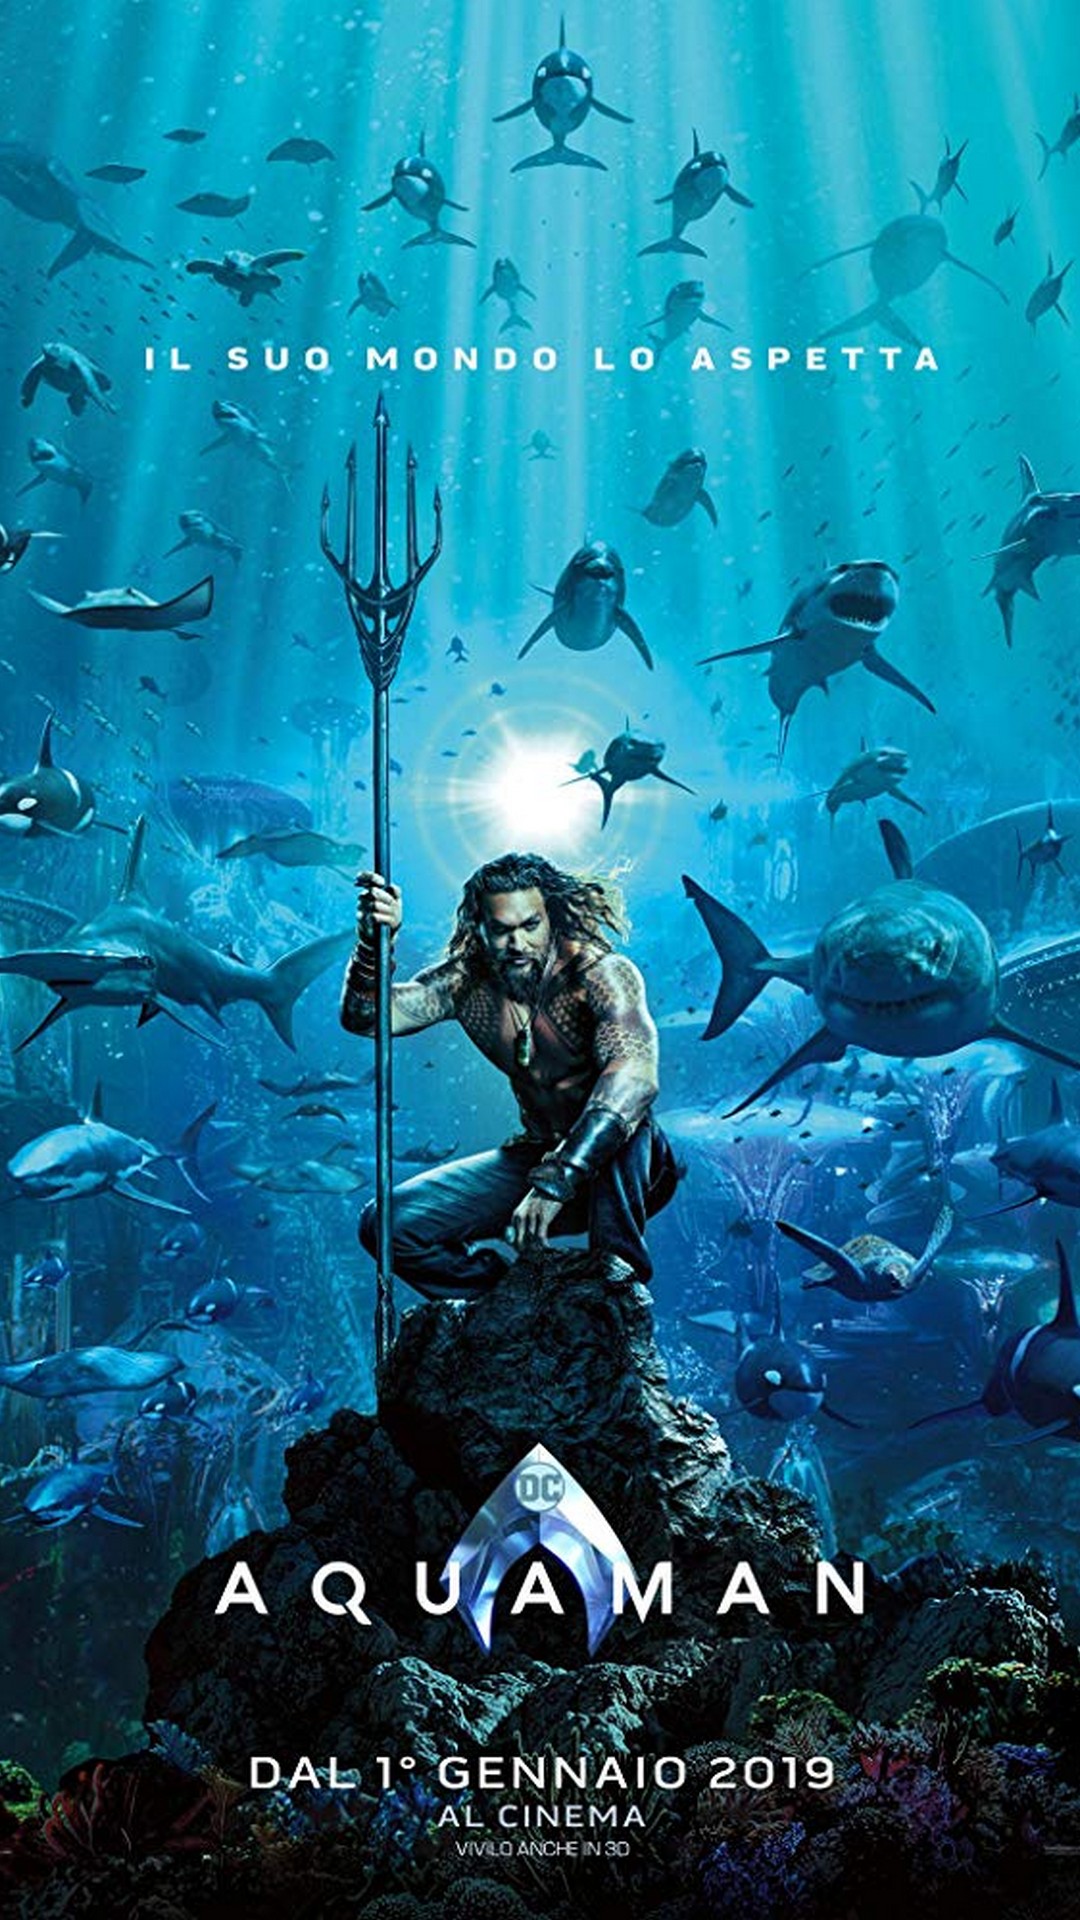 Aquaman iPhone Wallpaper HD With Resolution 1080X1920 pixel. You can make this wallpaper for your Desktop Computer Backgrounds, Mac Wallpapers, Android Lock screen or iPhone Screensavers